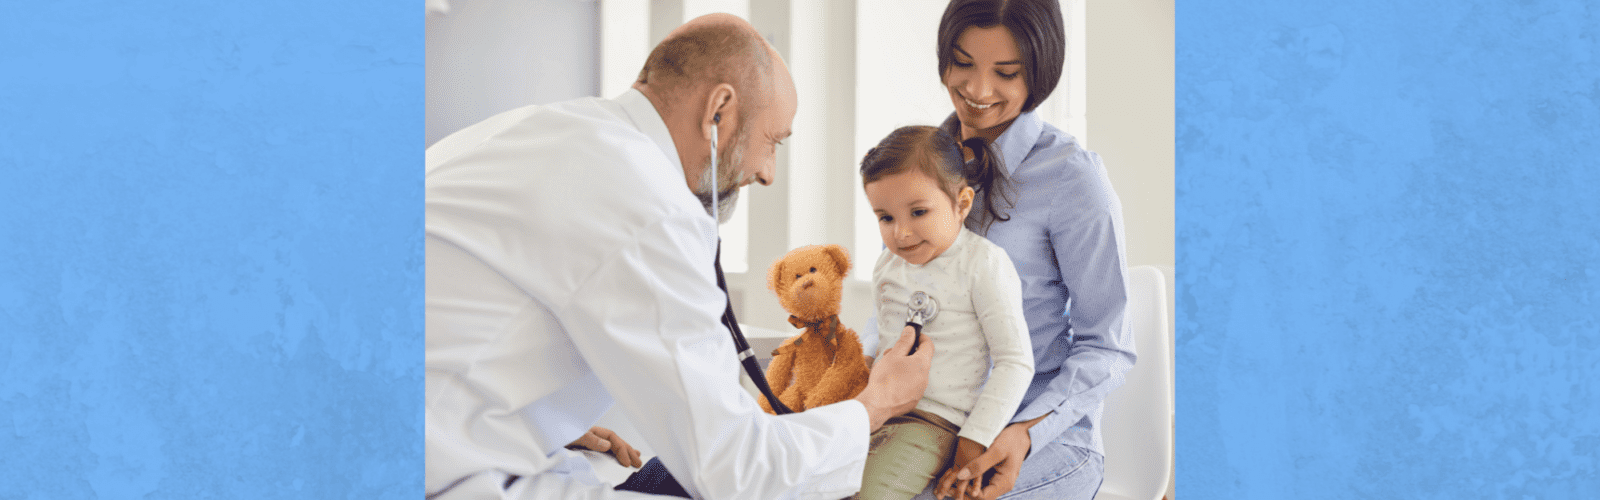 pediatric child with caregiver and doctor